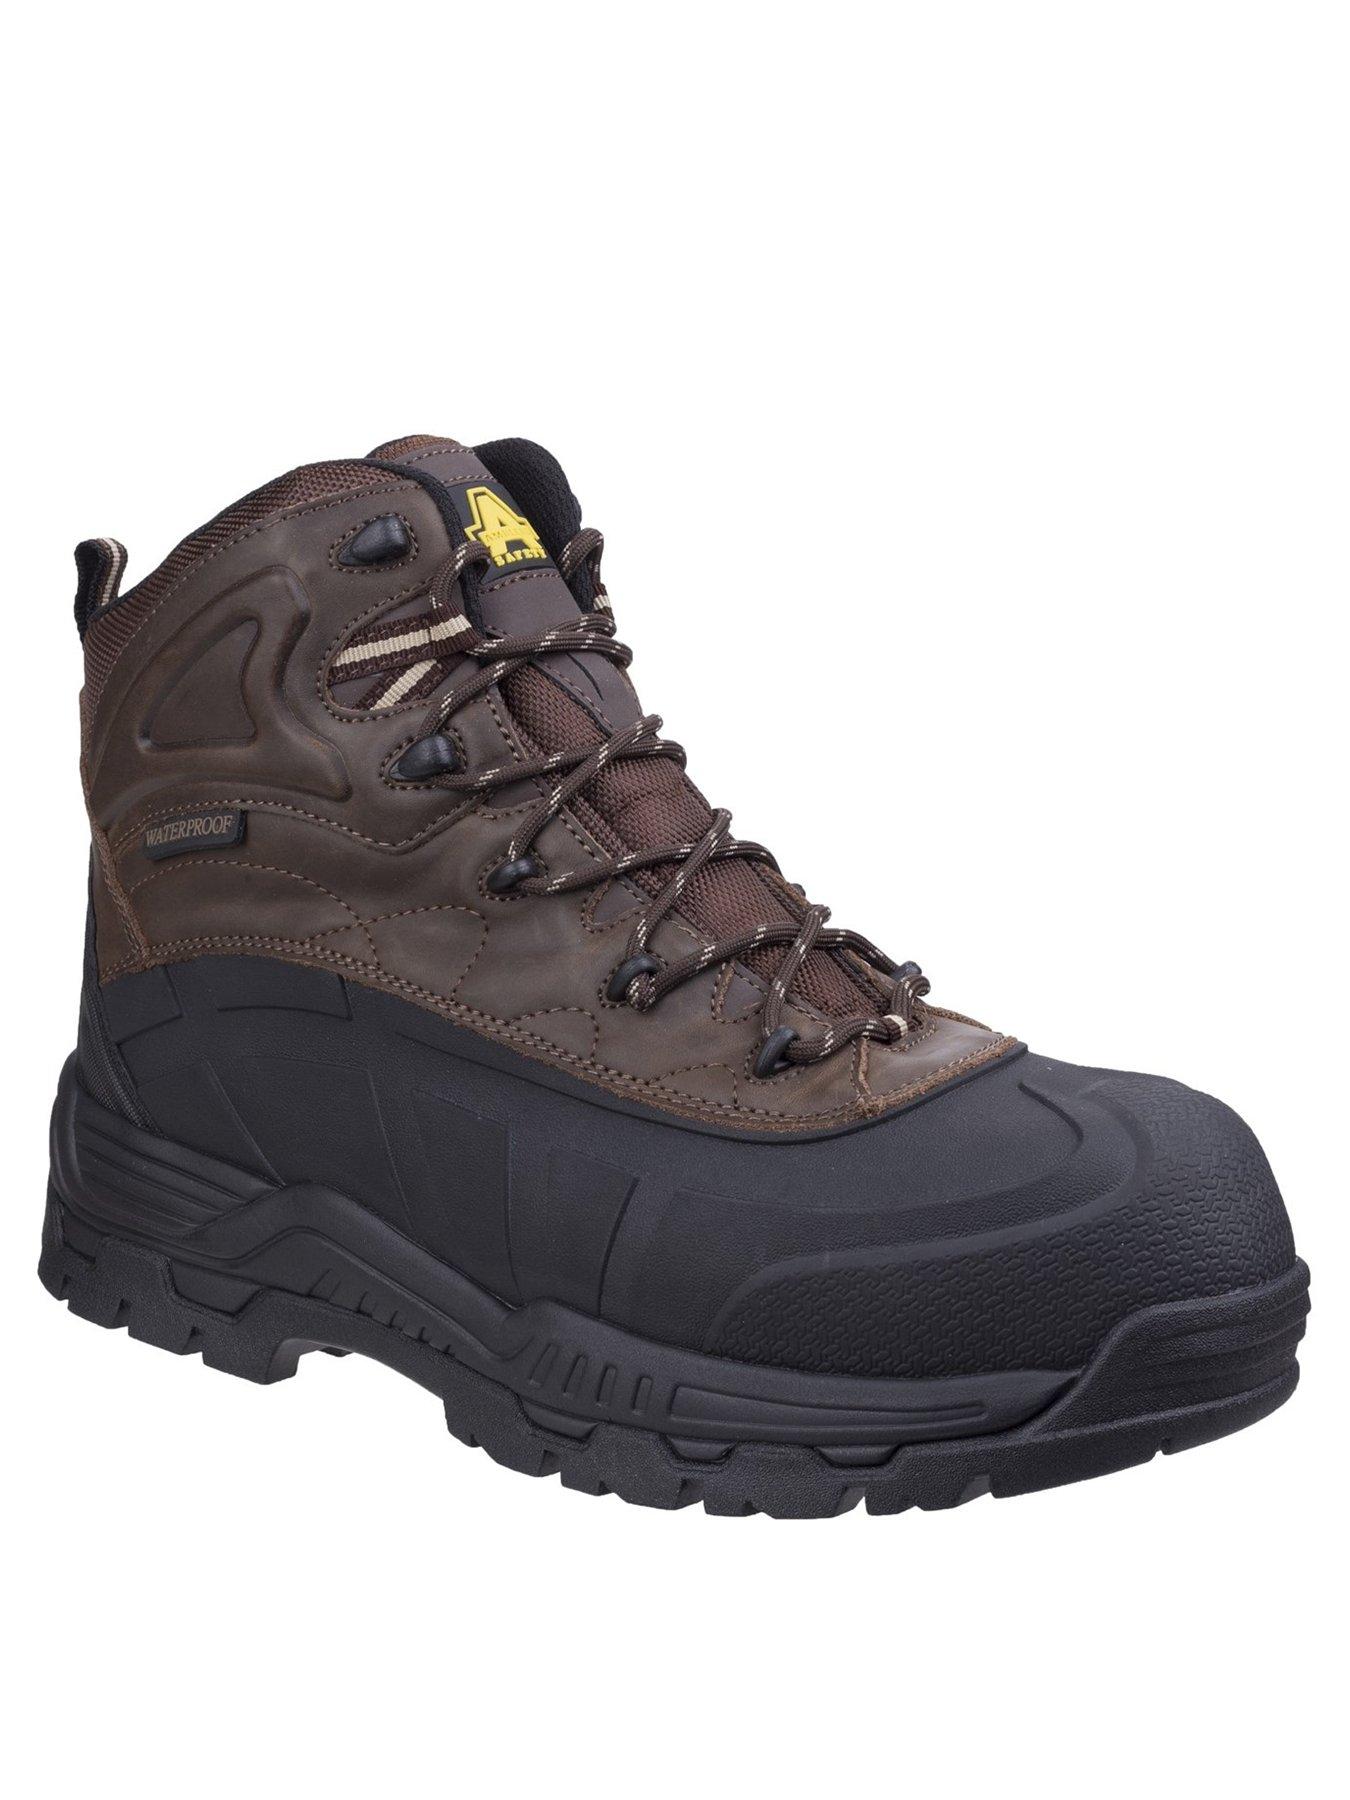 Shoes & boots Safety Fs430 Orca Boots - Brown